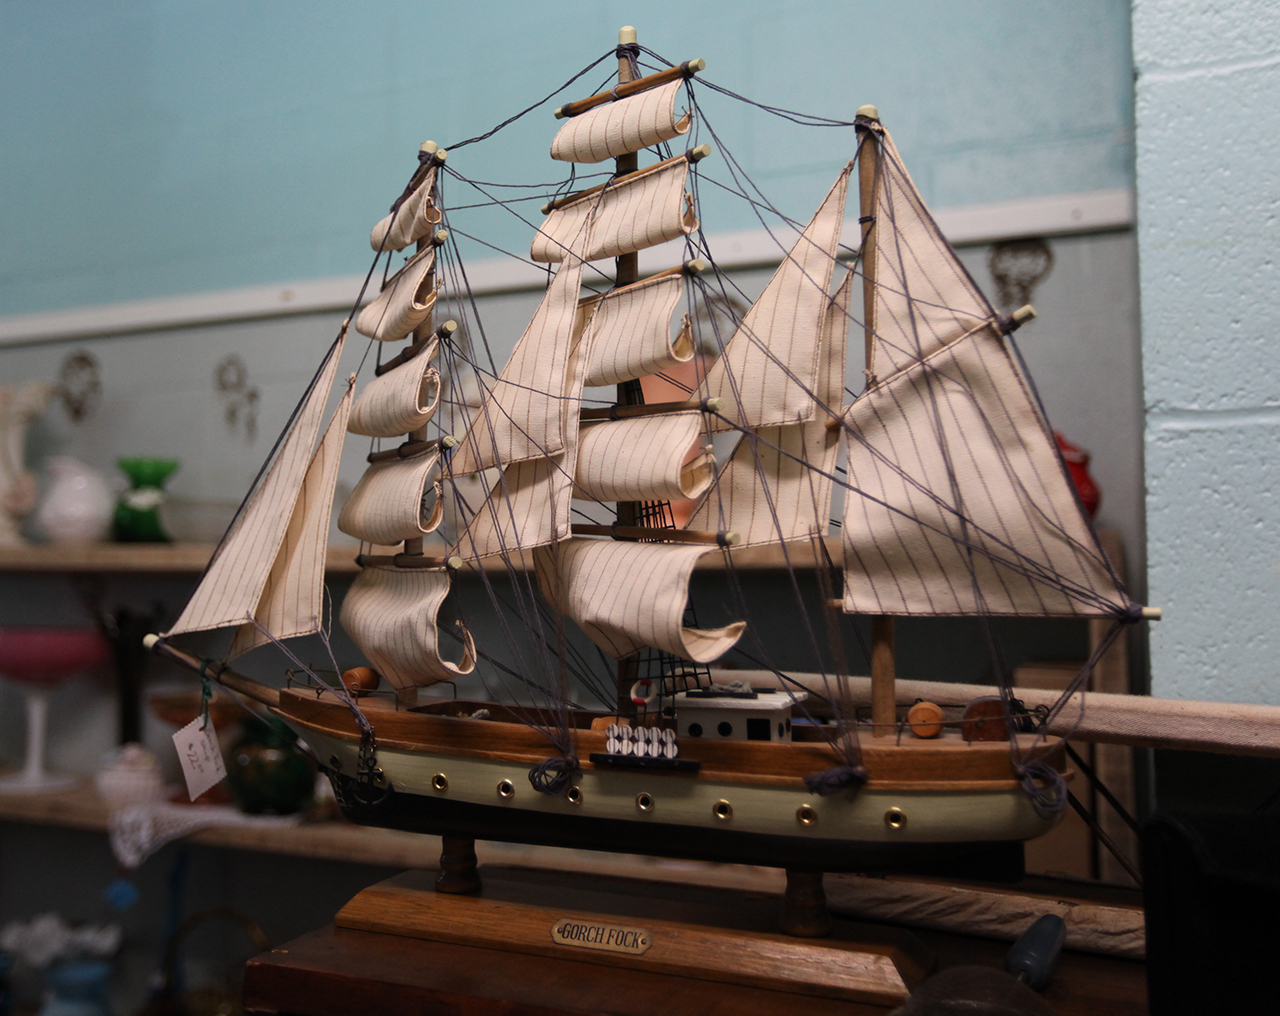 Gorch Fock Sailing Ship at Red House Elementary School Antique Mall